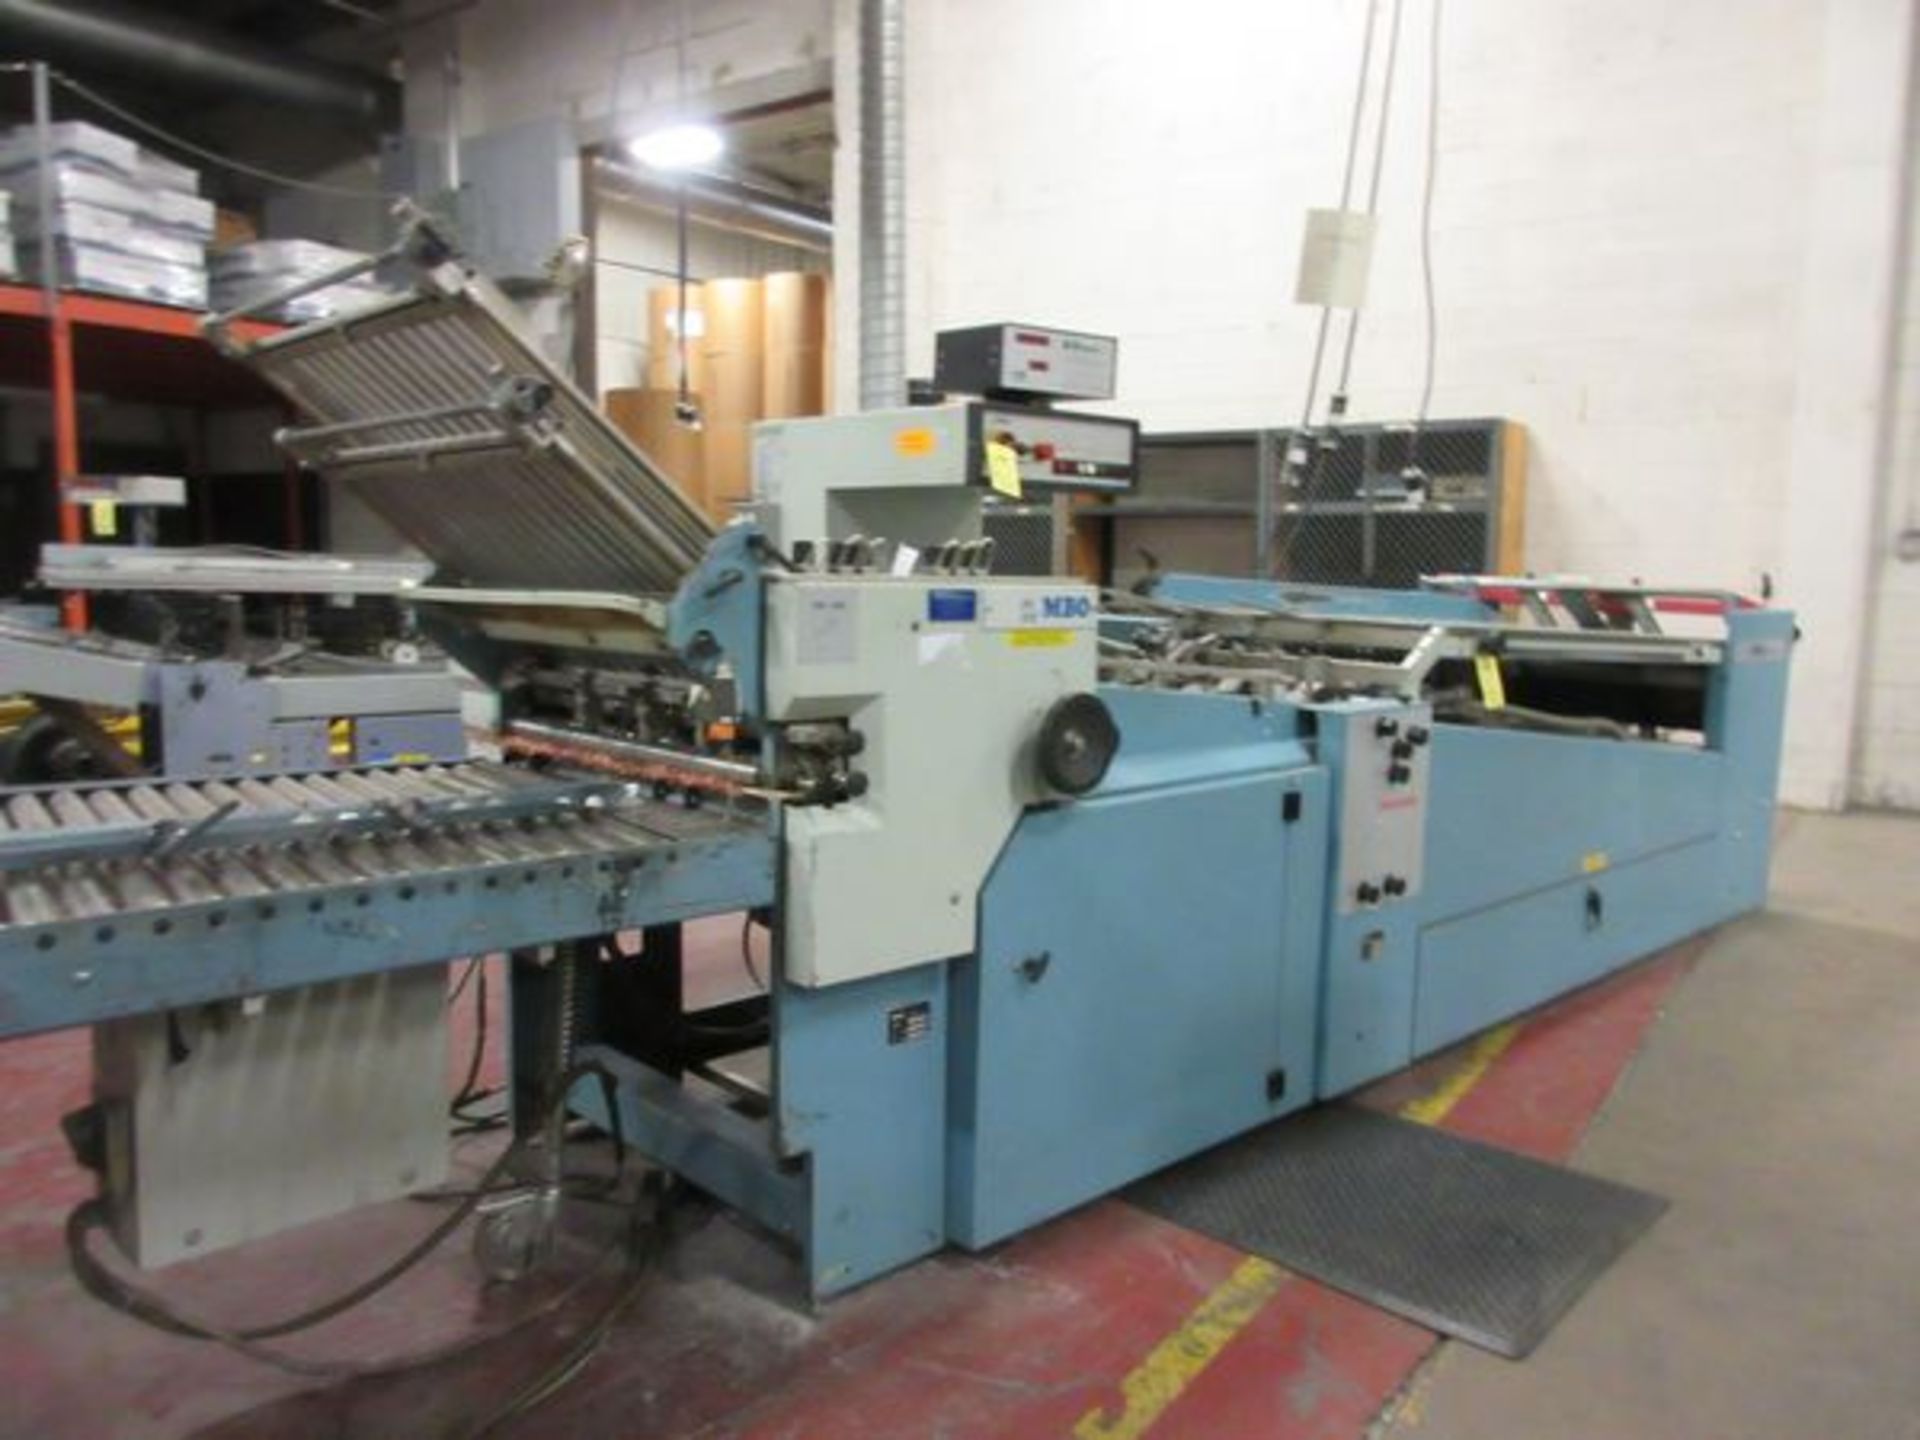 MBO Model B26S-C Dual Feed Folder, s/n T10/74, 4/4 Continuous Feed, 26" Cap., Perfection Vacuum